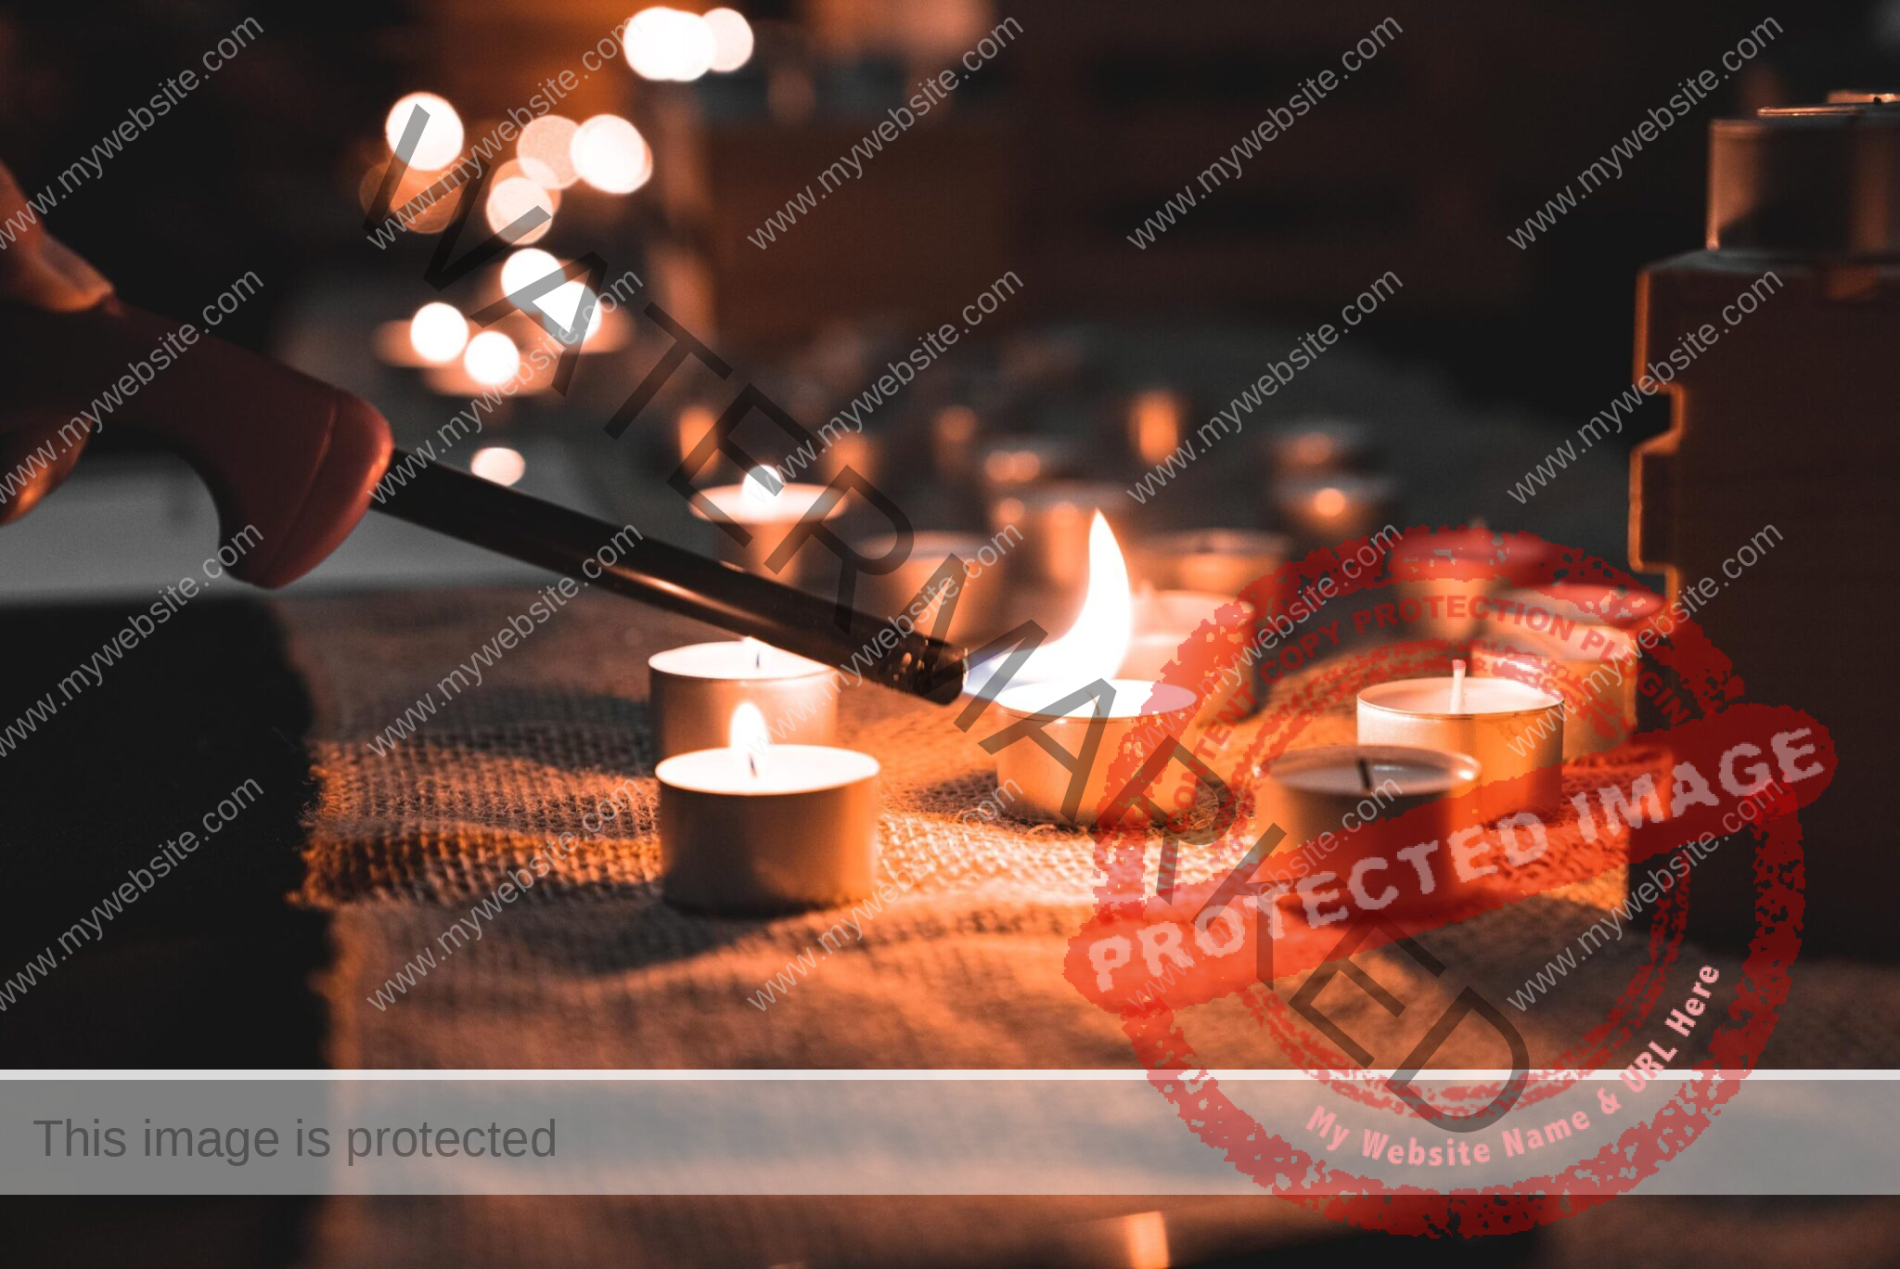 hand lighting a candle on a table with many other candles lit